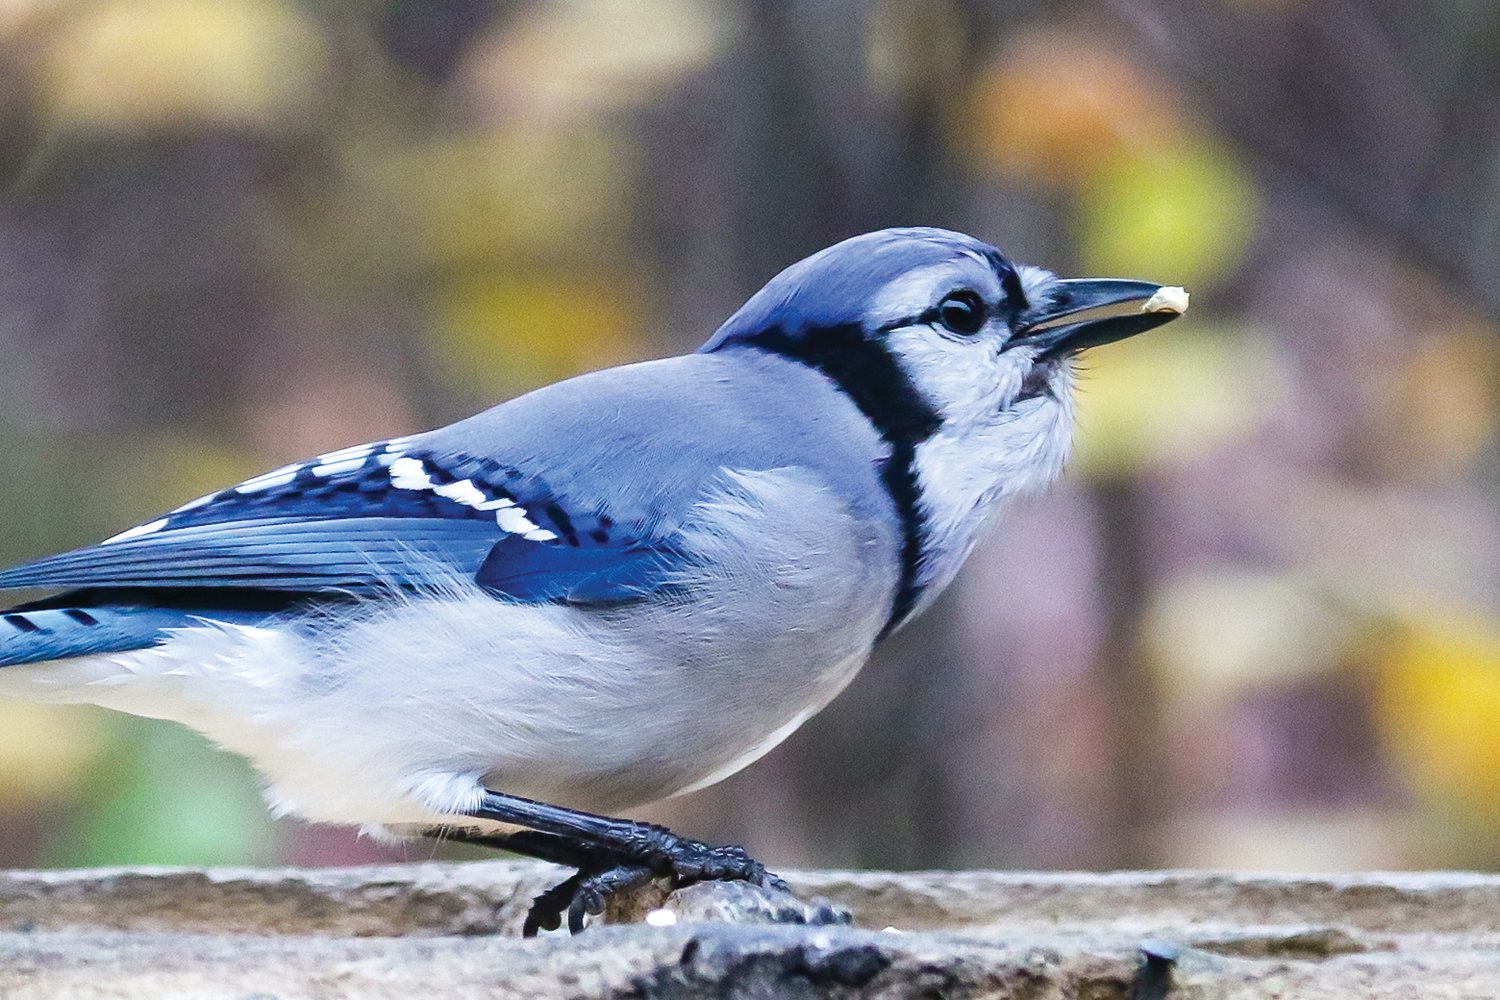 For jays, it's hoarding time - The Timberjay